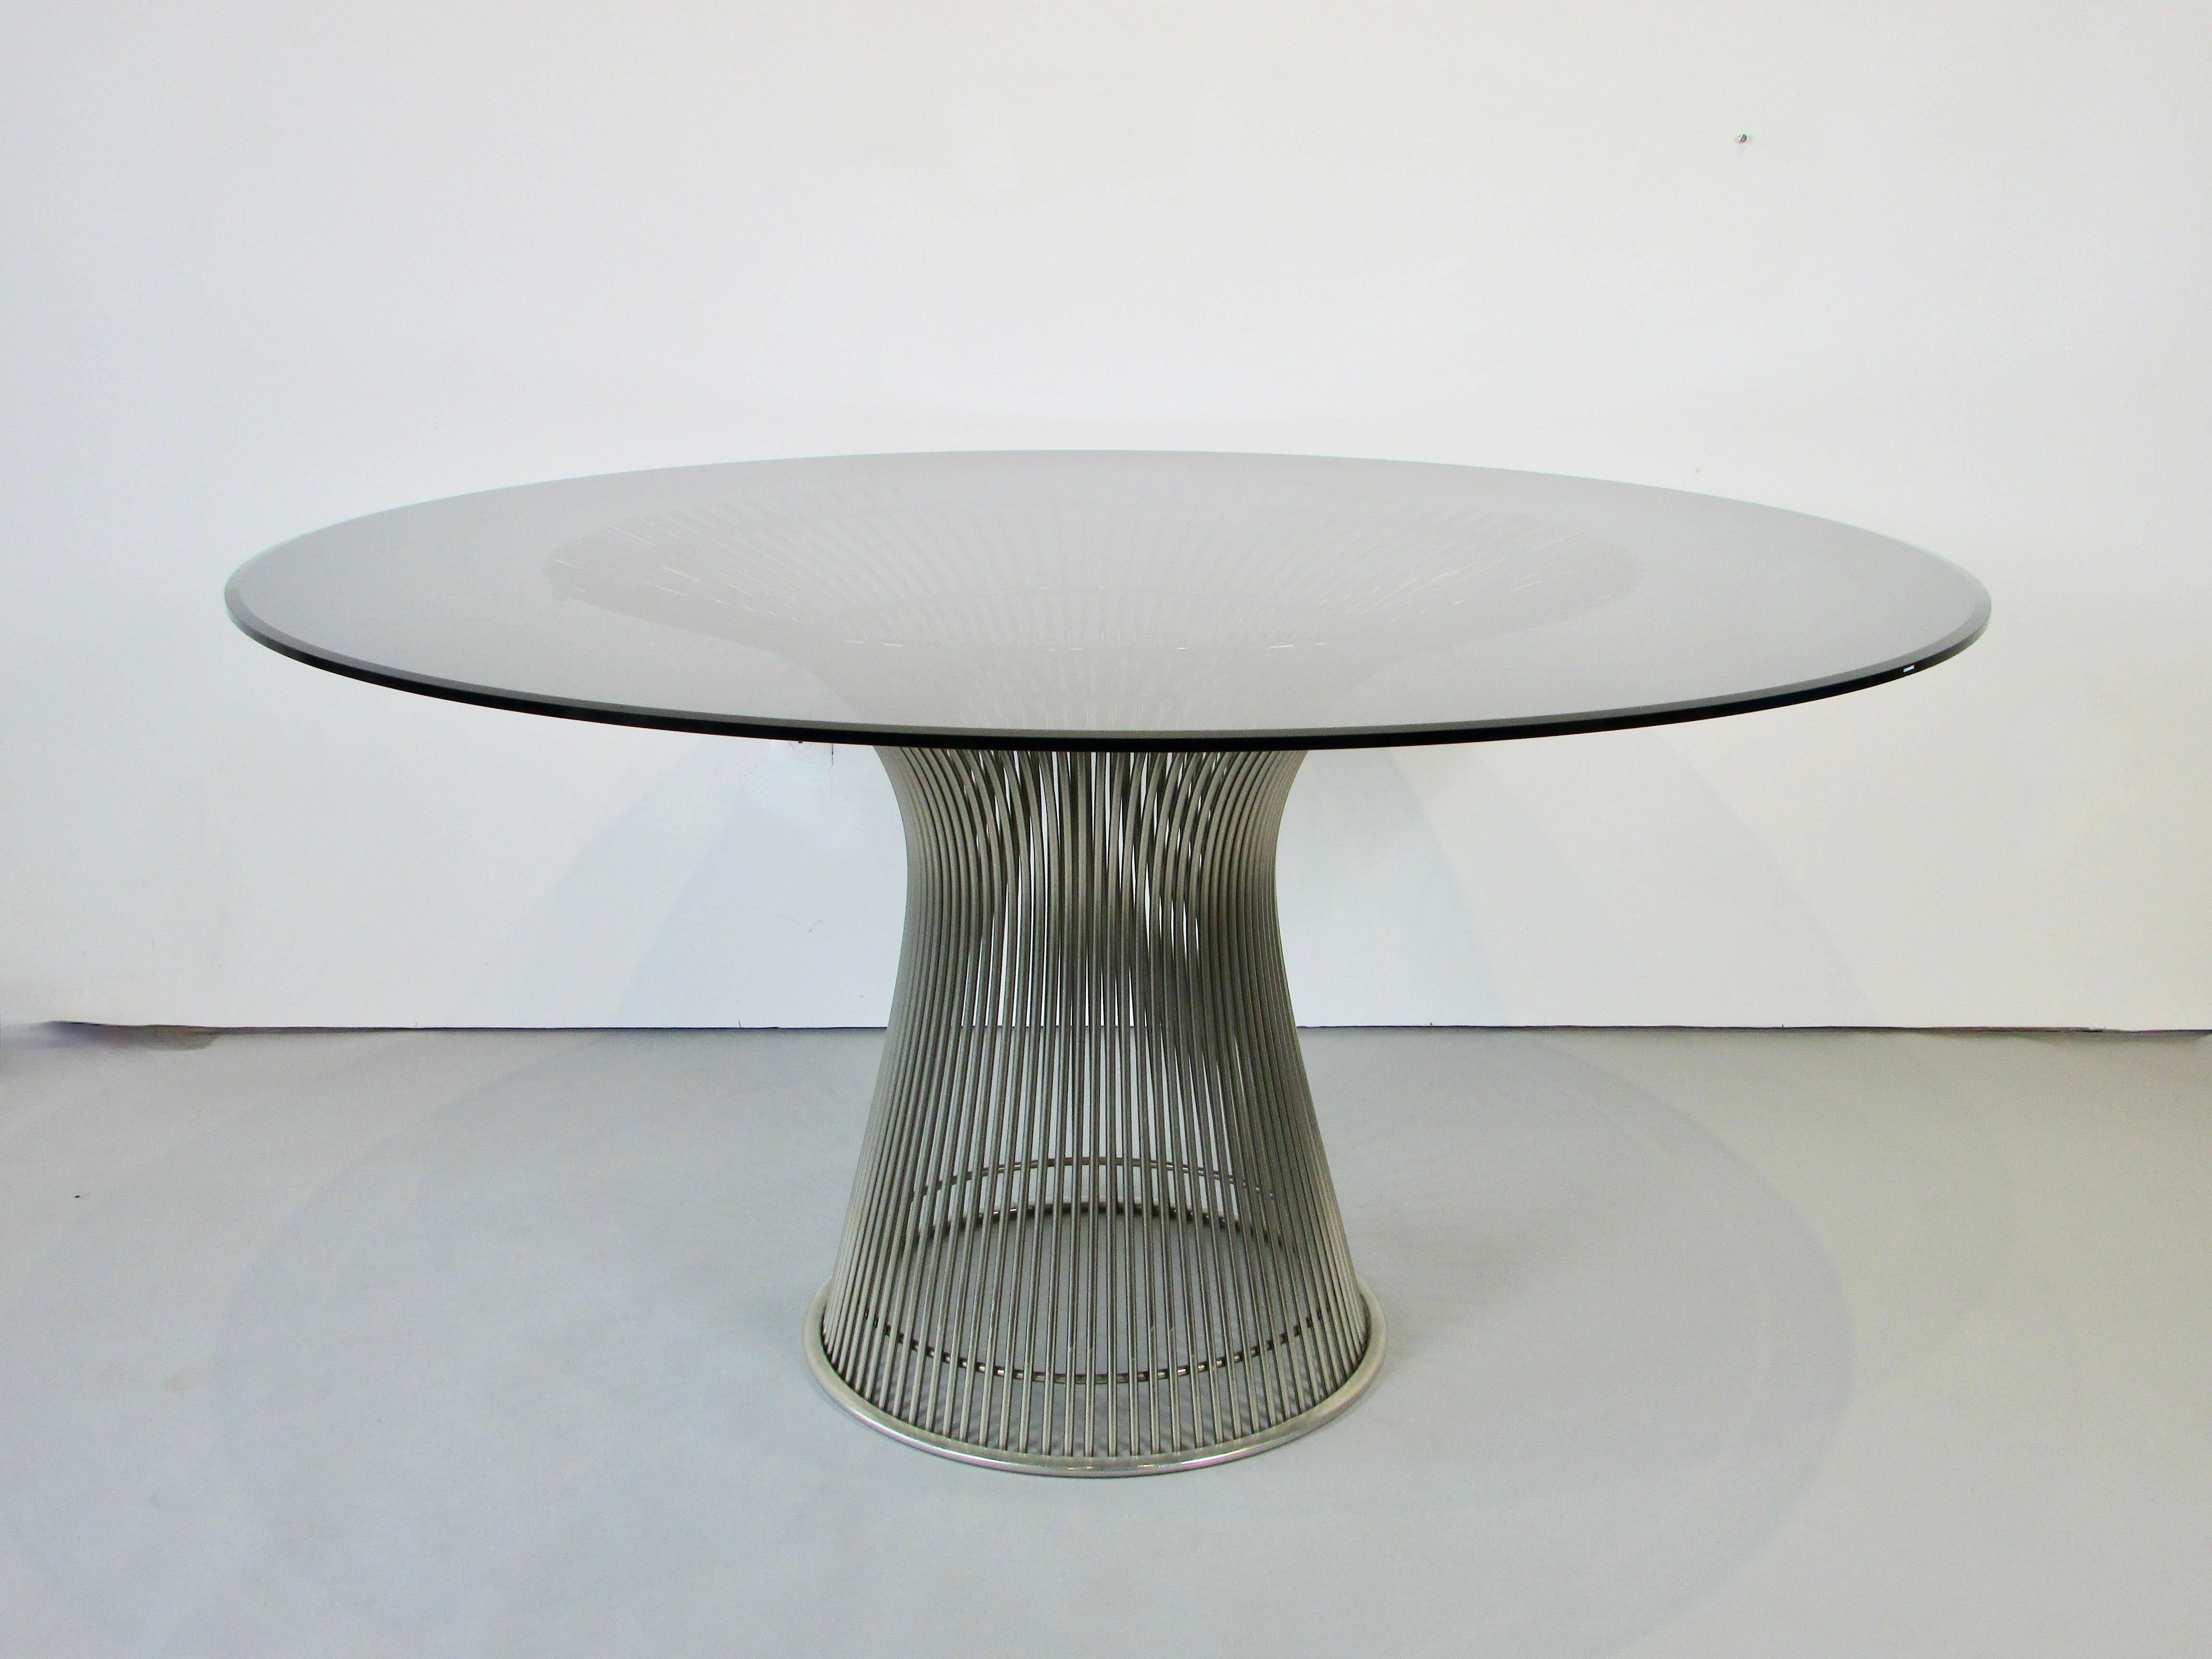 Platner collection for Knoll originally designed by Warren Platner in 1962. Finally launched after four years of development in 1966. Undulating nickel plated rods echo the light airiness of Harry Berrtoias work and the sculptural forms of Eero